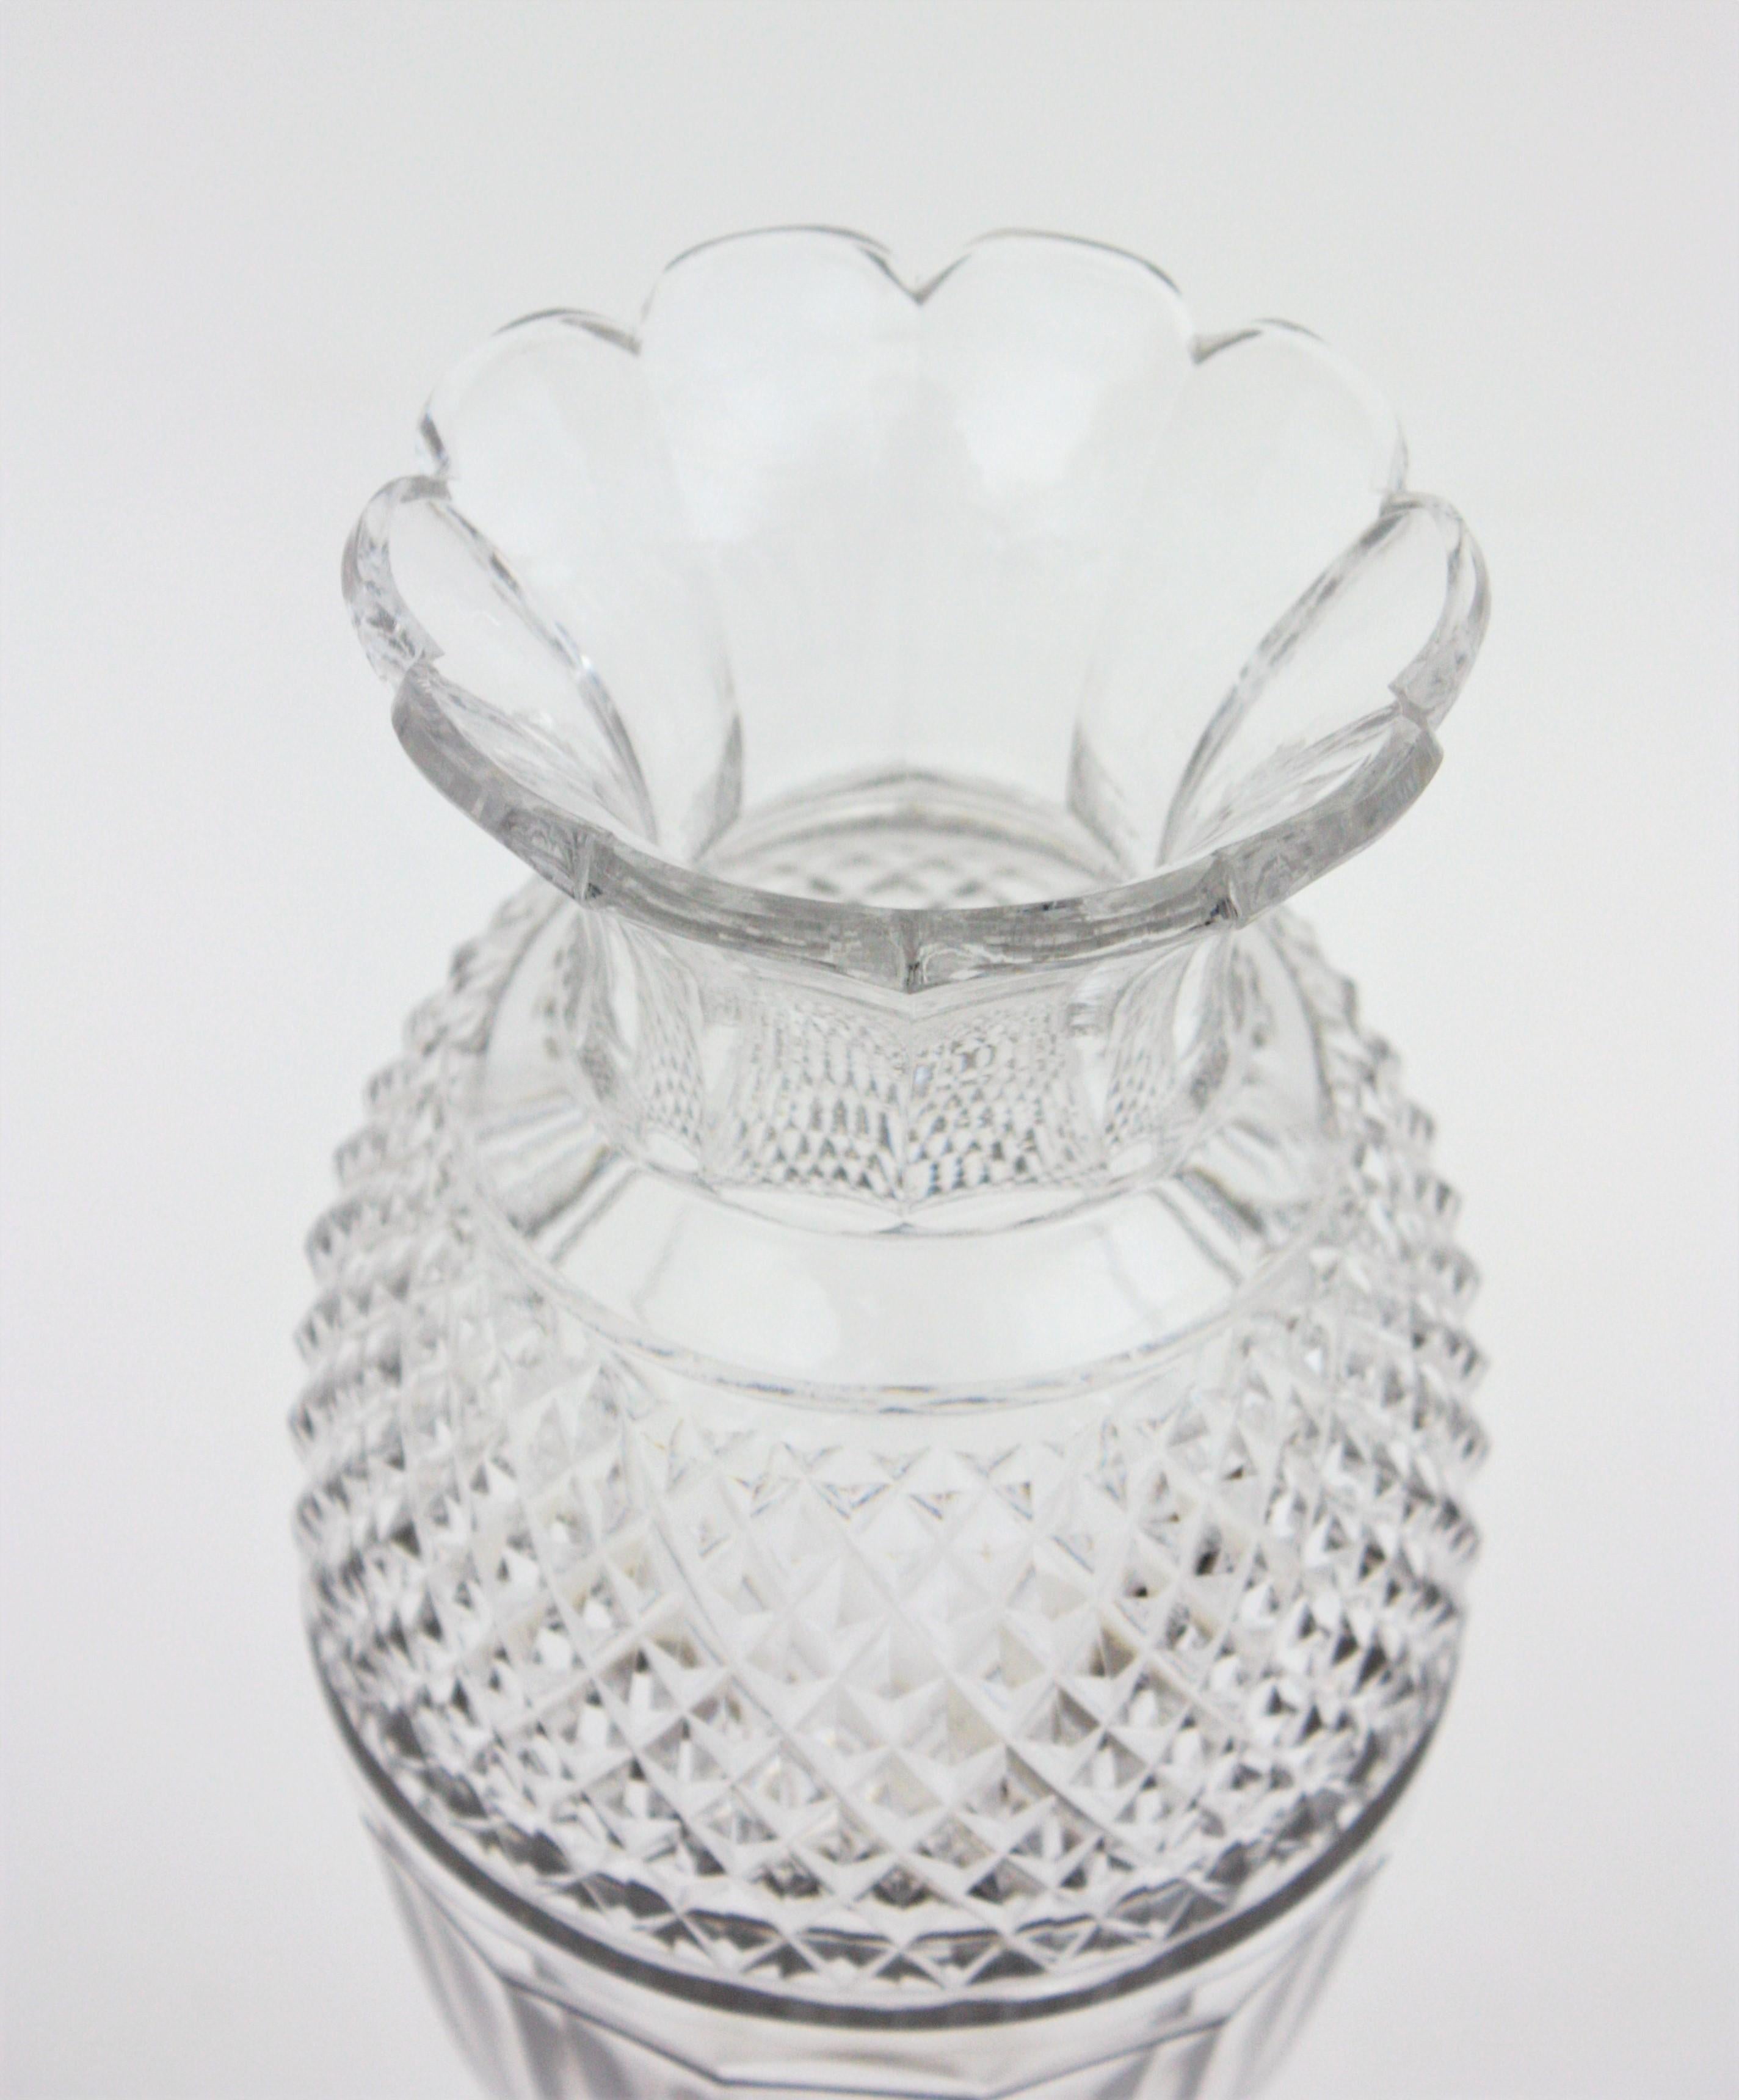 Spanish Art Deco Cut Crystal and Silver Urn Vase For Sale 2